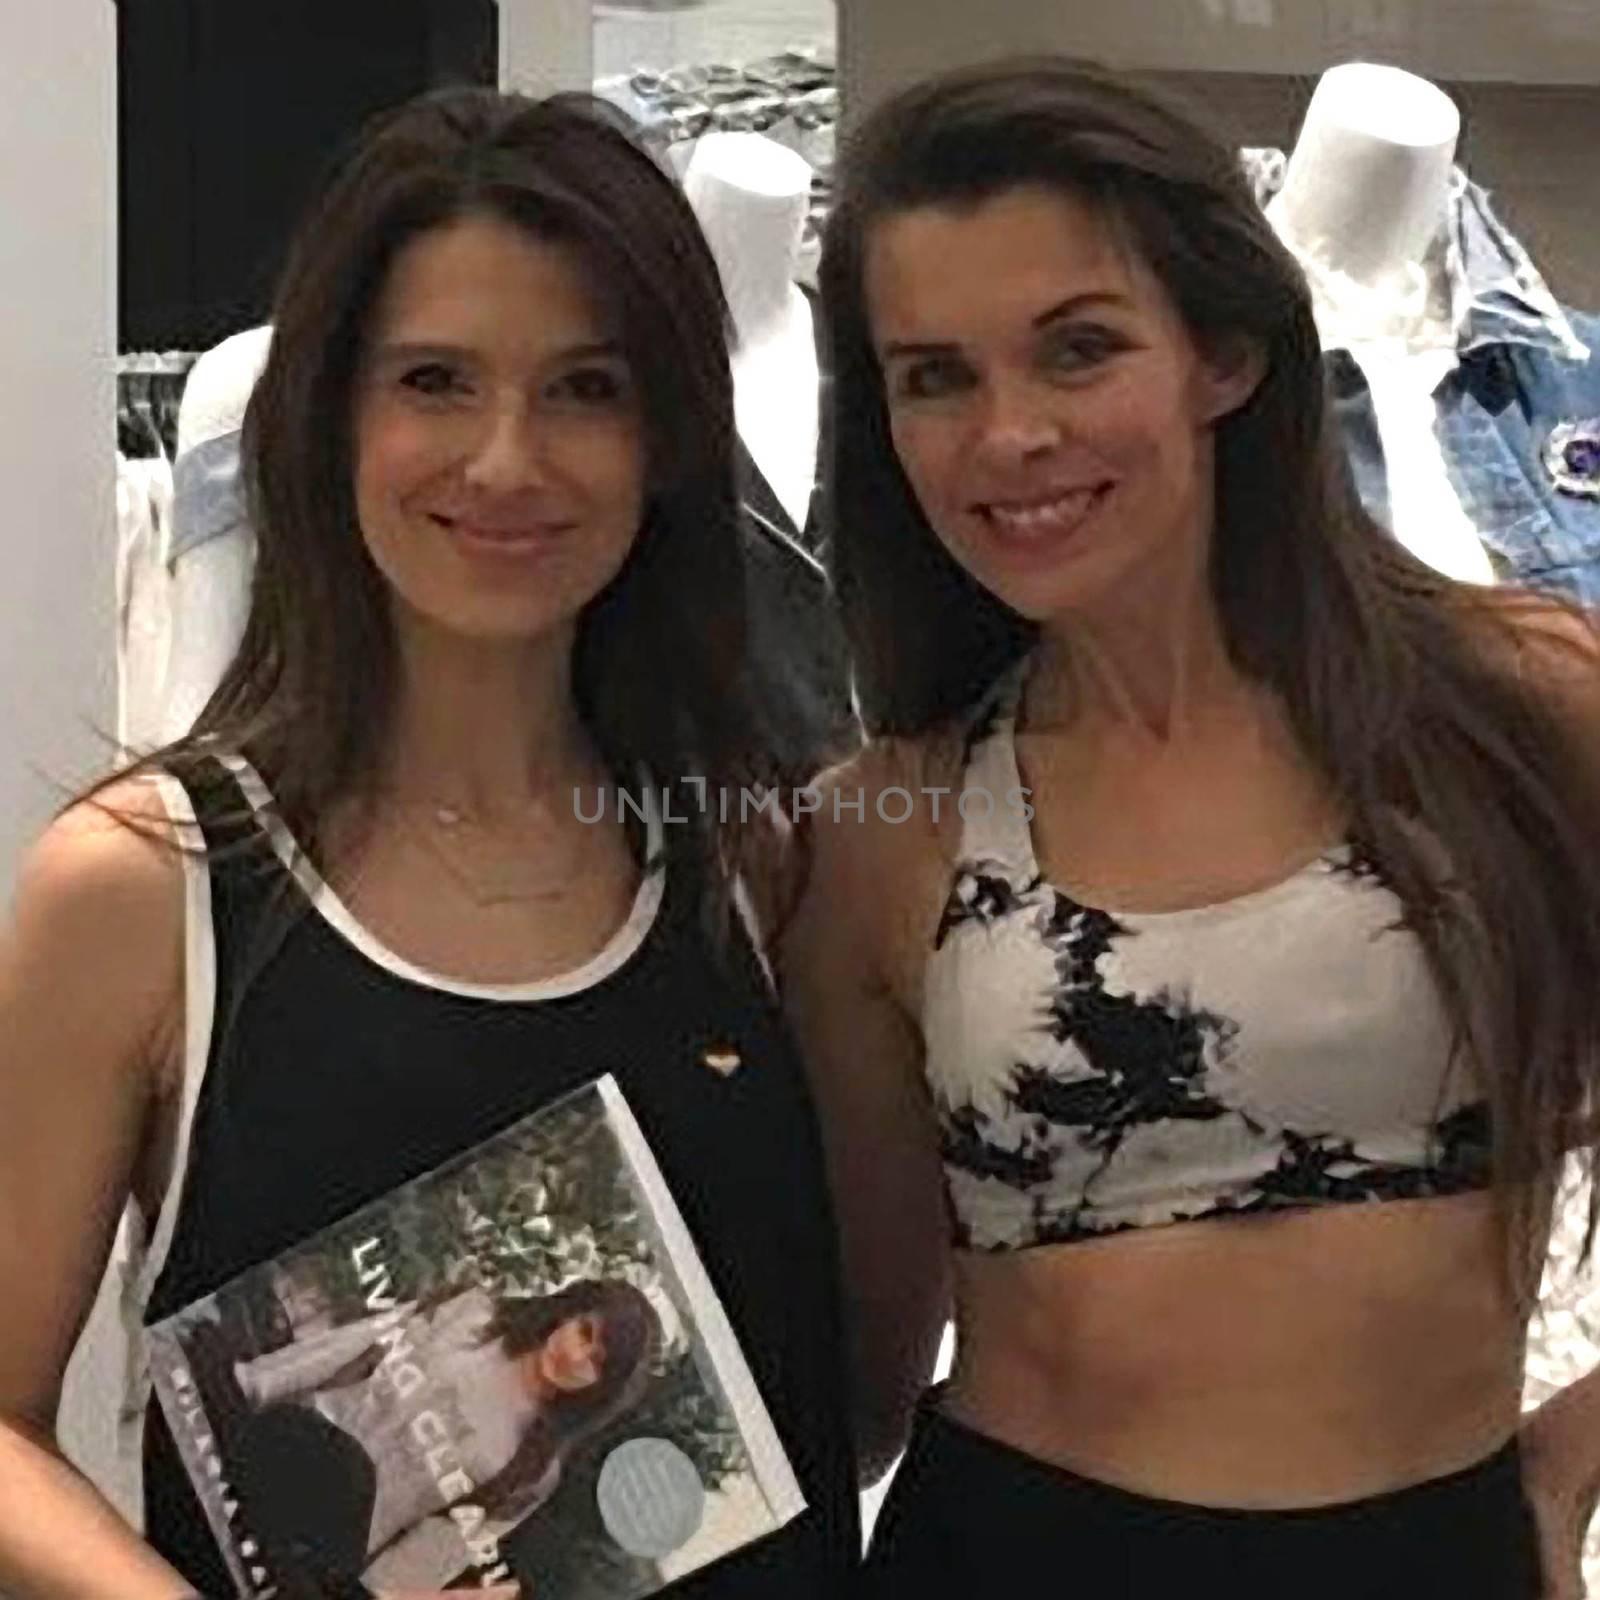 Hilaria Baldwin, Alicia Arden
at Morning Yoga with Hilaria Baldwin to celebrate the release of her new book "The Living Clearly Method," Bllomingdales, Century City, CA 03-04-17/ImageCollect by ImageCollect